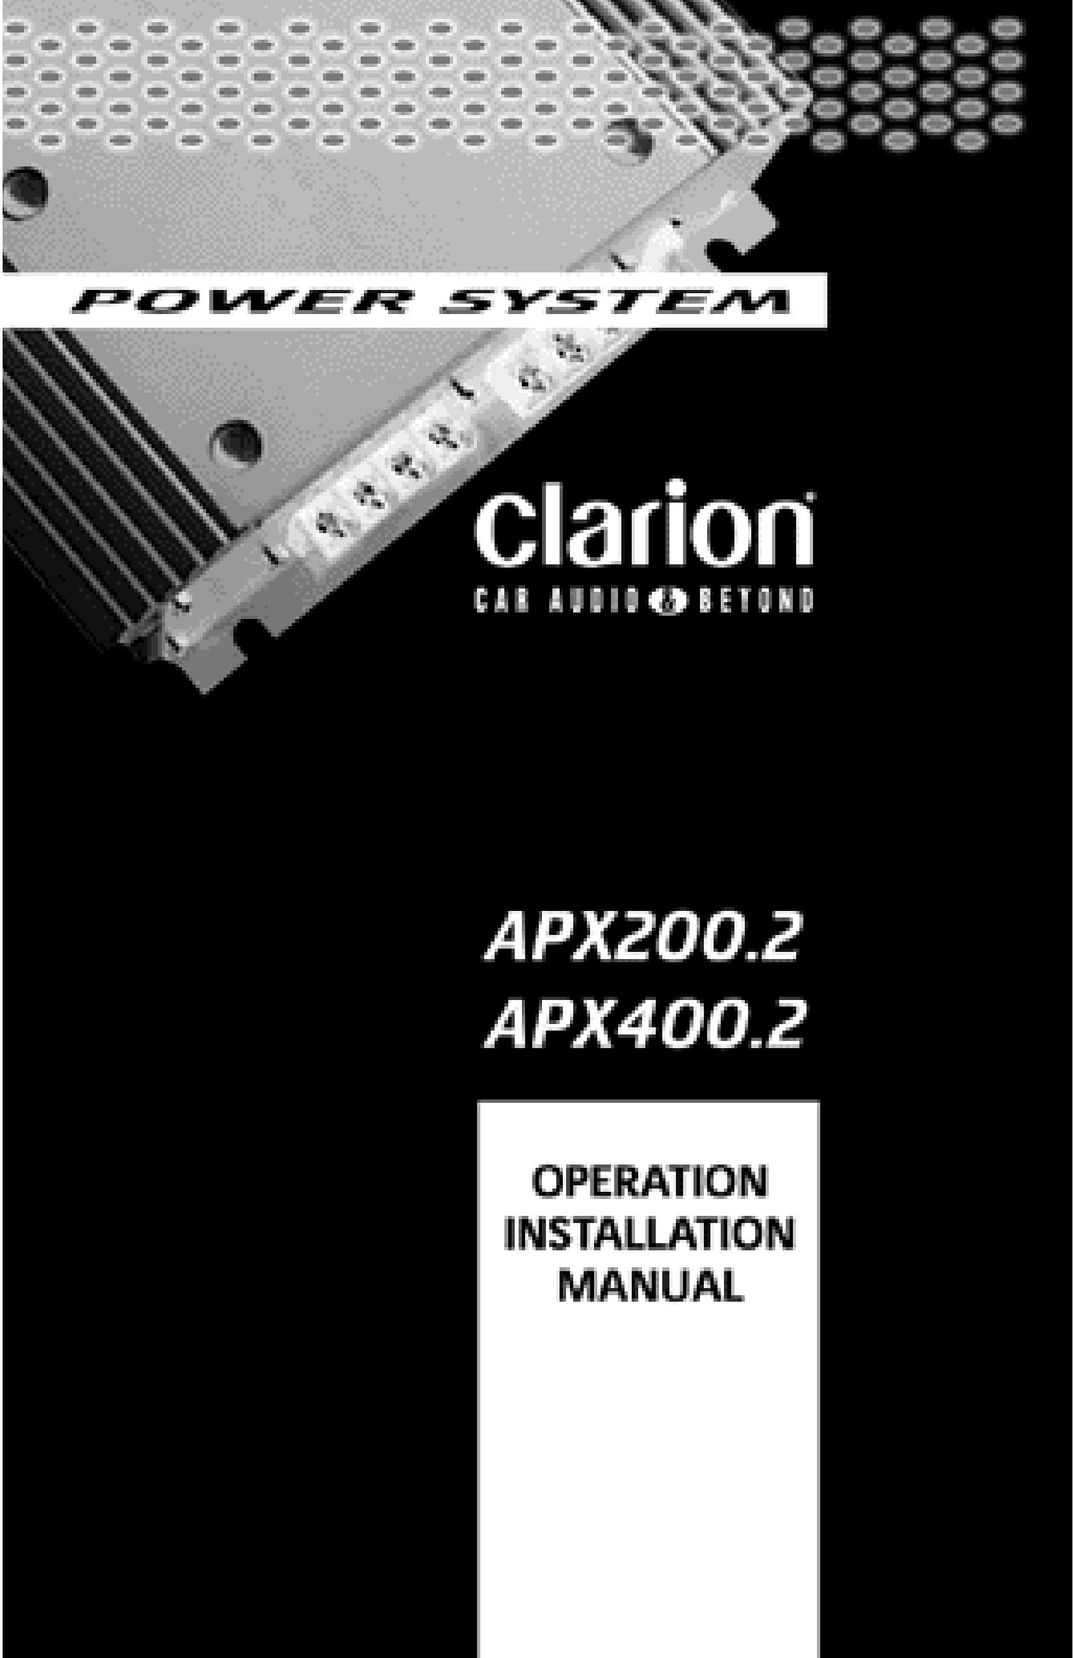 Clarion APX400.2 Power Supply User Manual